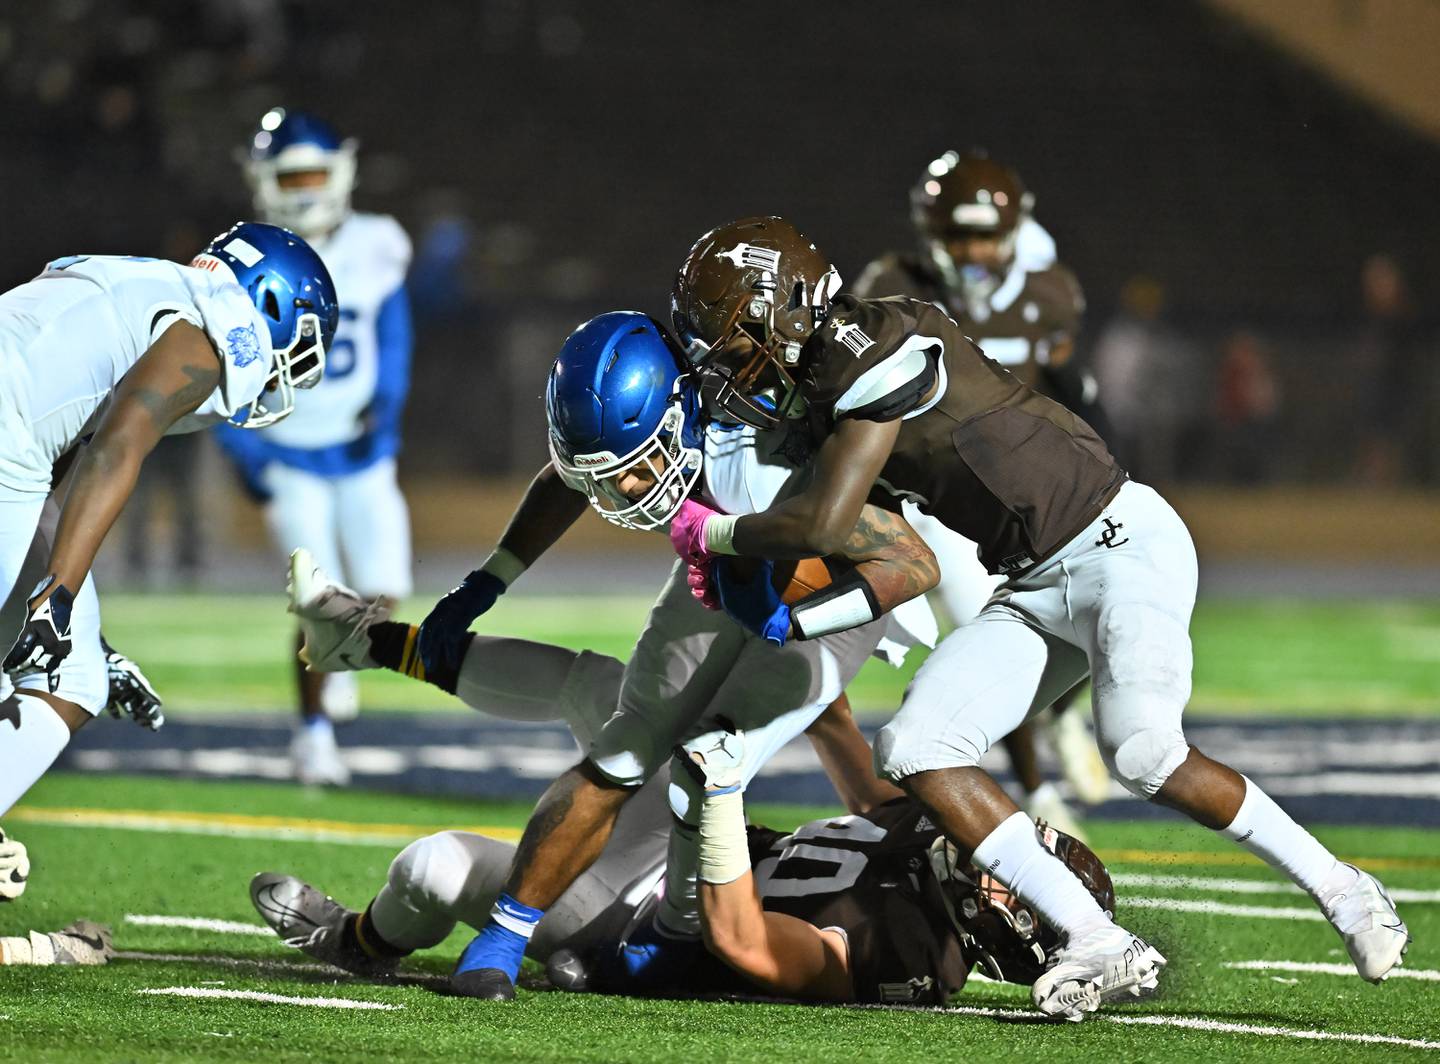 Joliet Catholic's Bryant Weston (6) tackles the Phillips running back during IHSA Class 4A first round playoff on Friday, Oct. 28, 2022, at Joliet. (Dean Reid for Shaw Media)